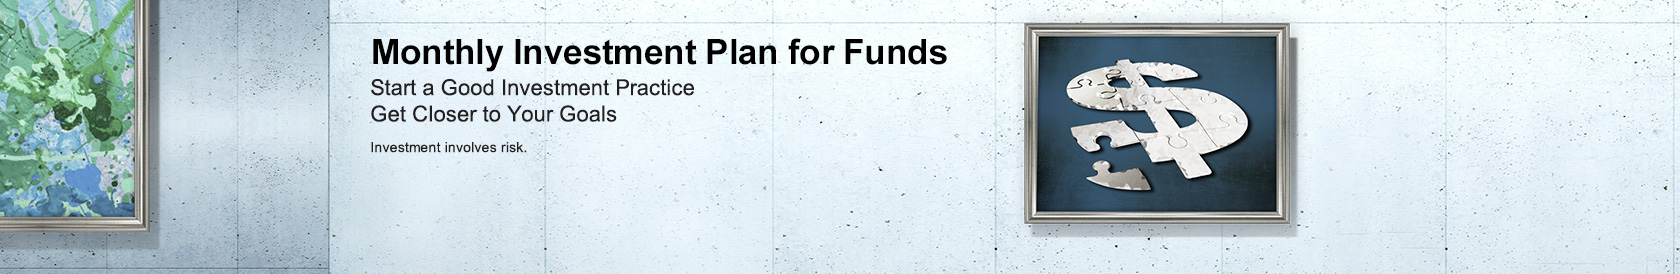 Monthly Investment Plan for Funds Start a Good Investment Practice Get closer to Your Goals Investment involves risk